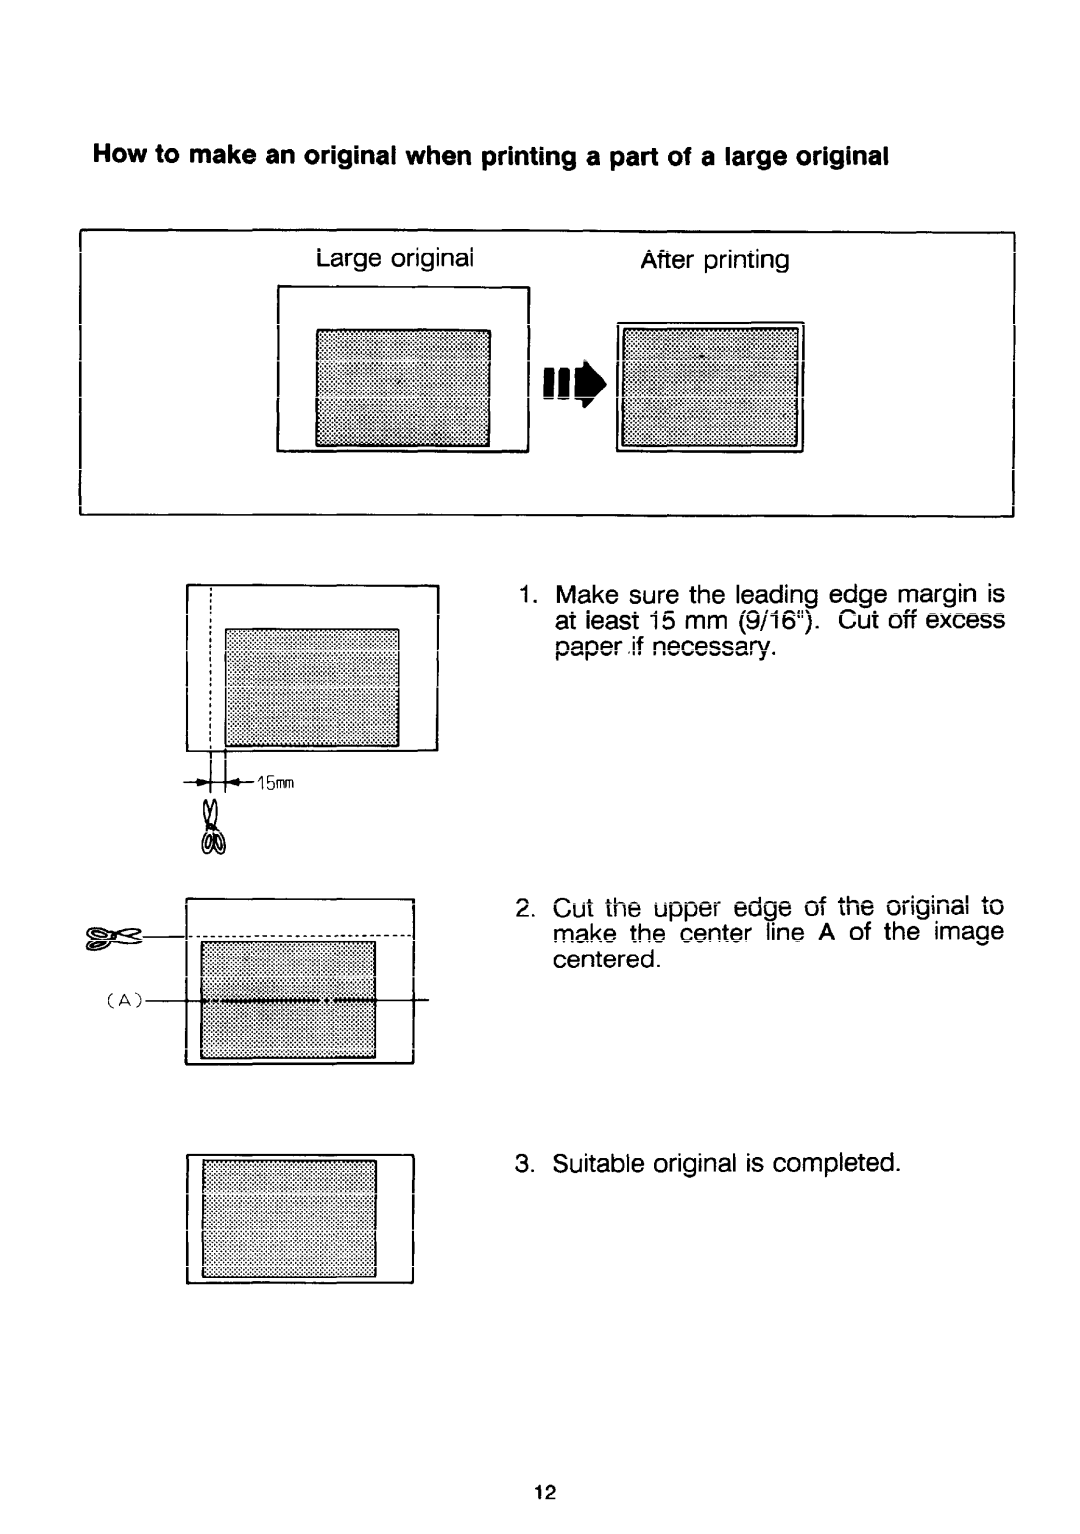 Ricoh PRIPORT VT2130 How to make an original when printing a part of a large original, Large original, After printing 